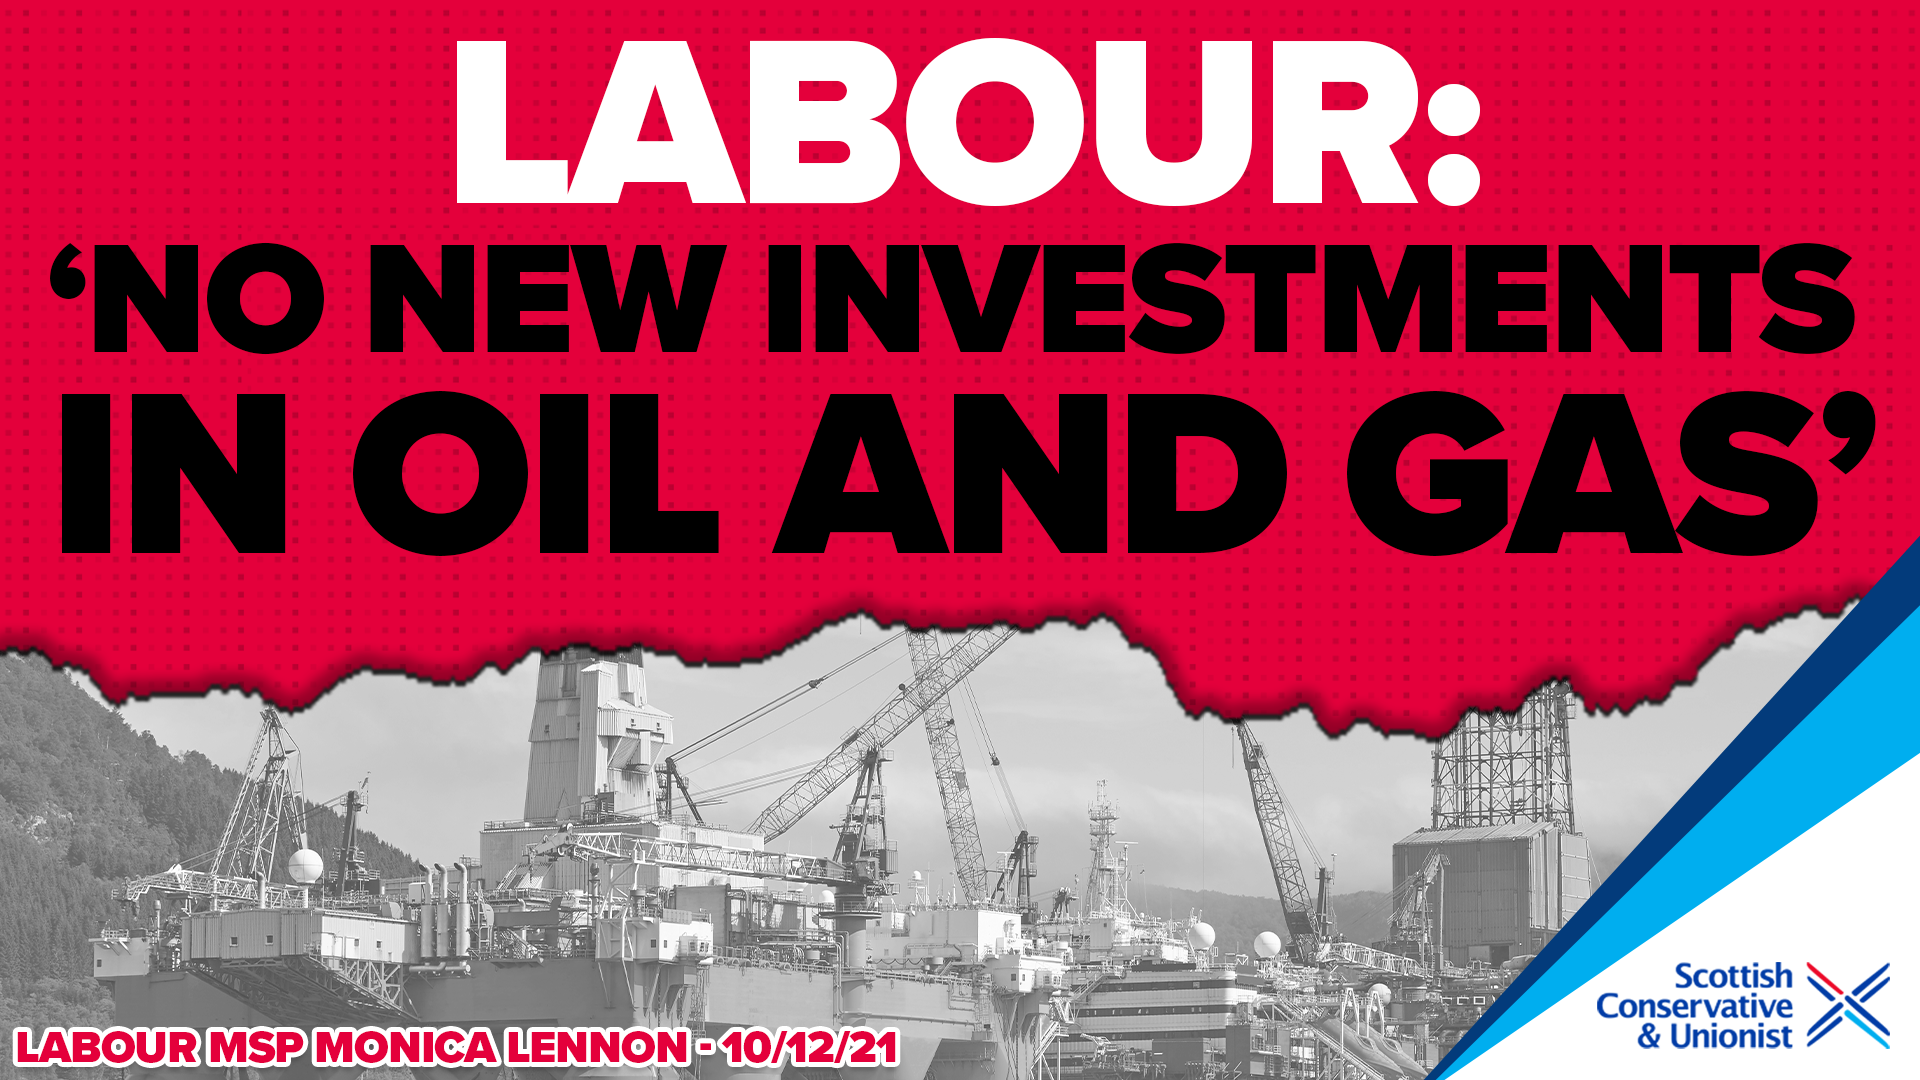 labour oil and gas Only the Scottish Conservatives support Scotland's oil and gas industry